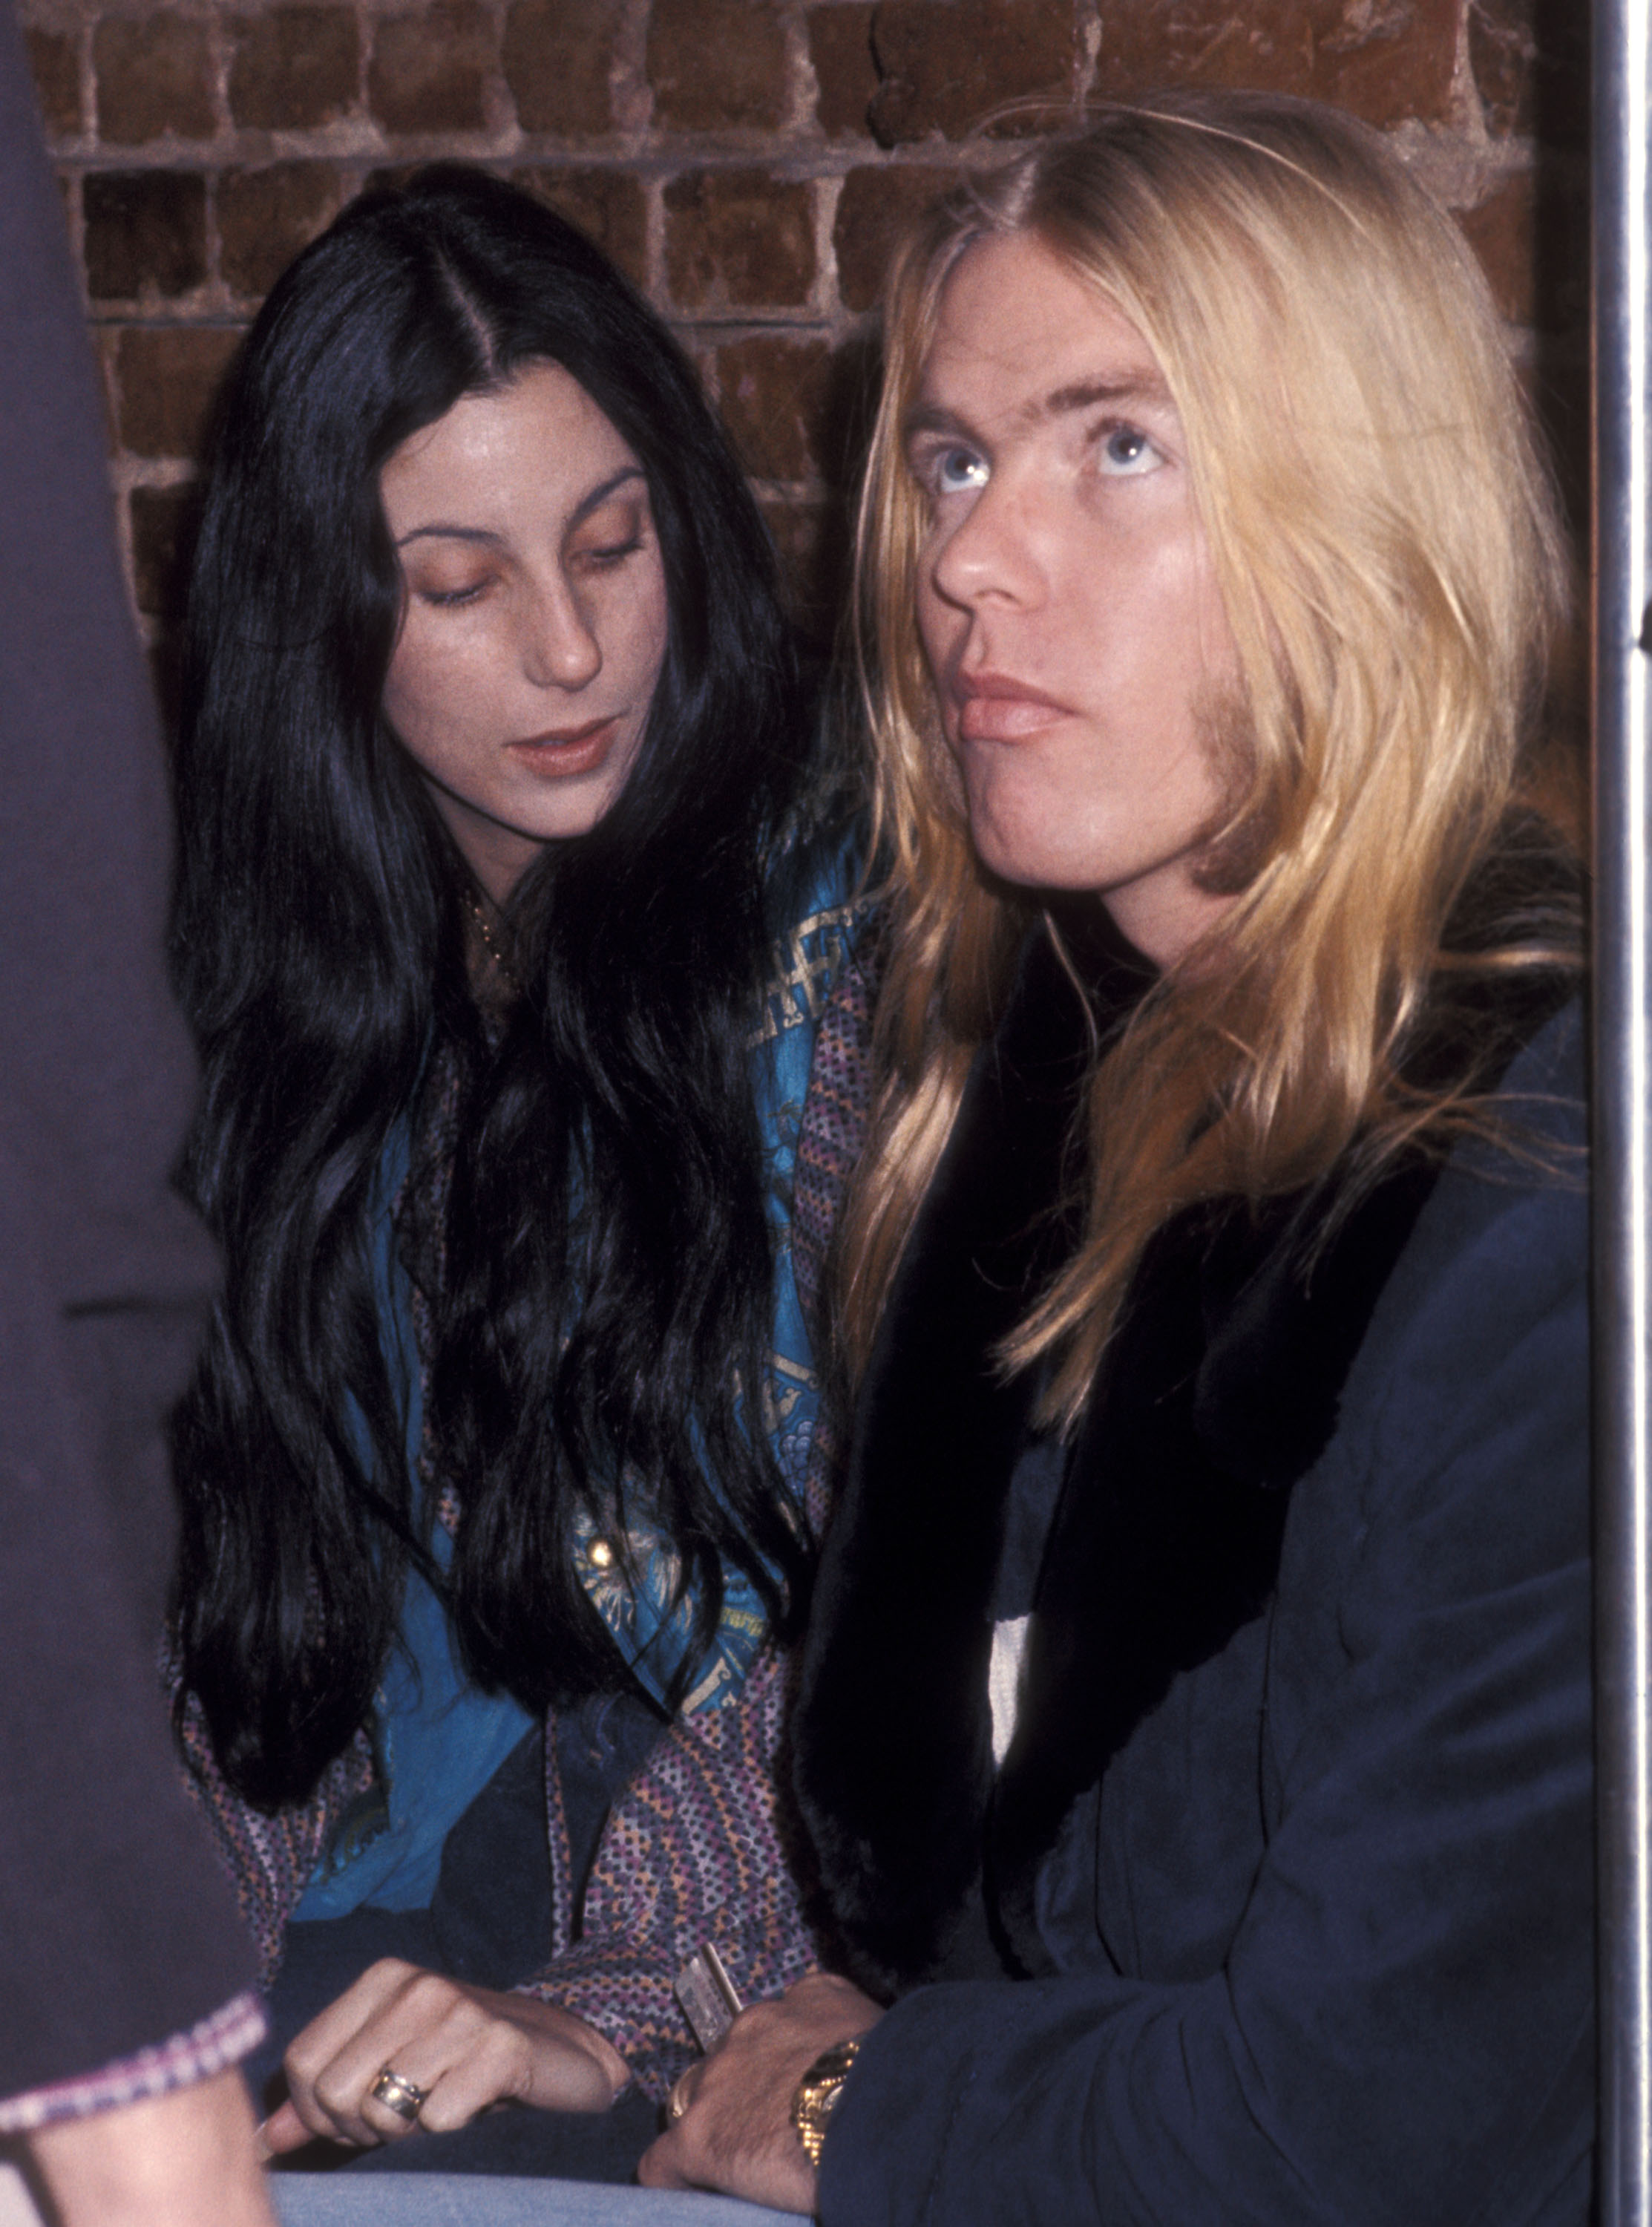 Cher and Gregg Allman shop on Wisconsin Avenue in Washington, DC, on January 21, 1977. | Source: Getty Images